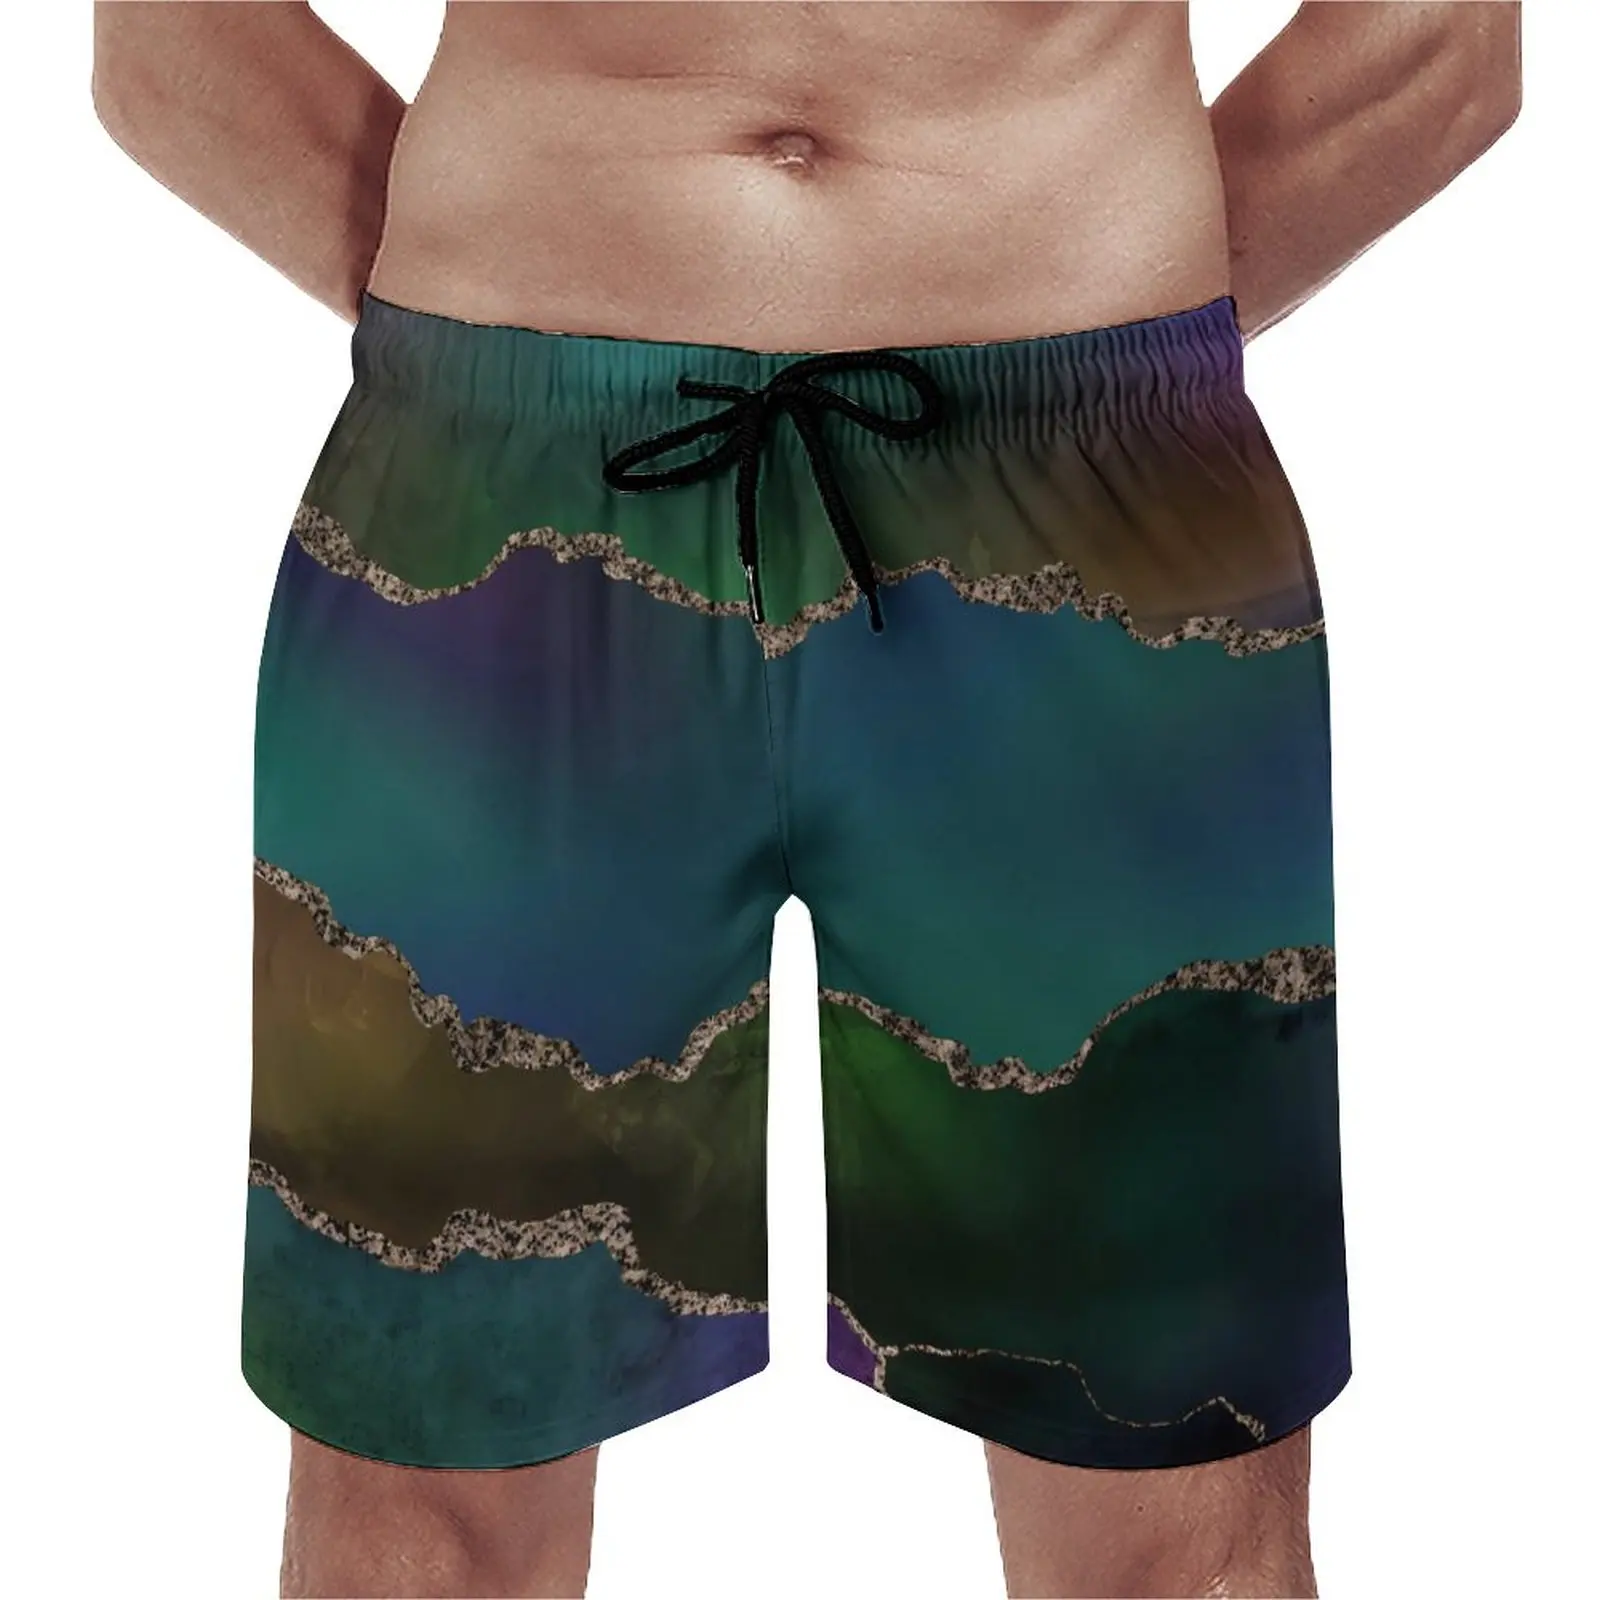 

Dark Ombre Gym Shorts Summer Colorful Print Surfing Board Short Pants Men Quick Dry Casual Custom Plus Size Swim Trunks